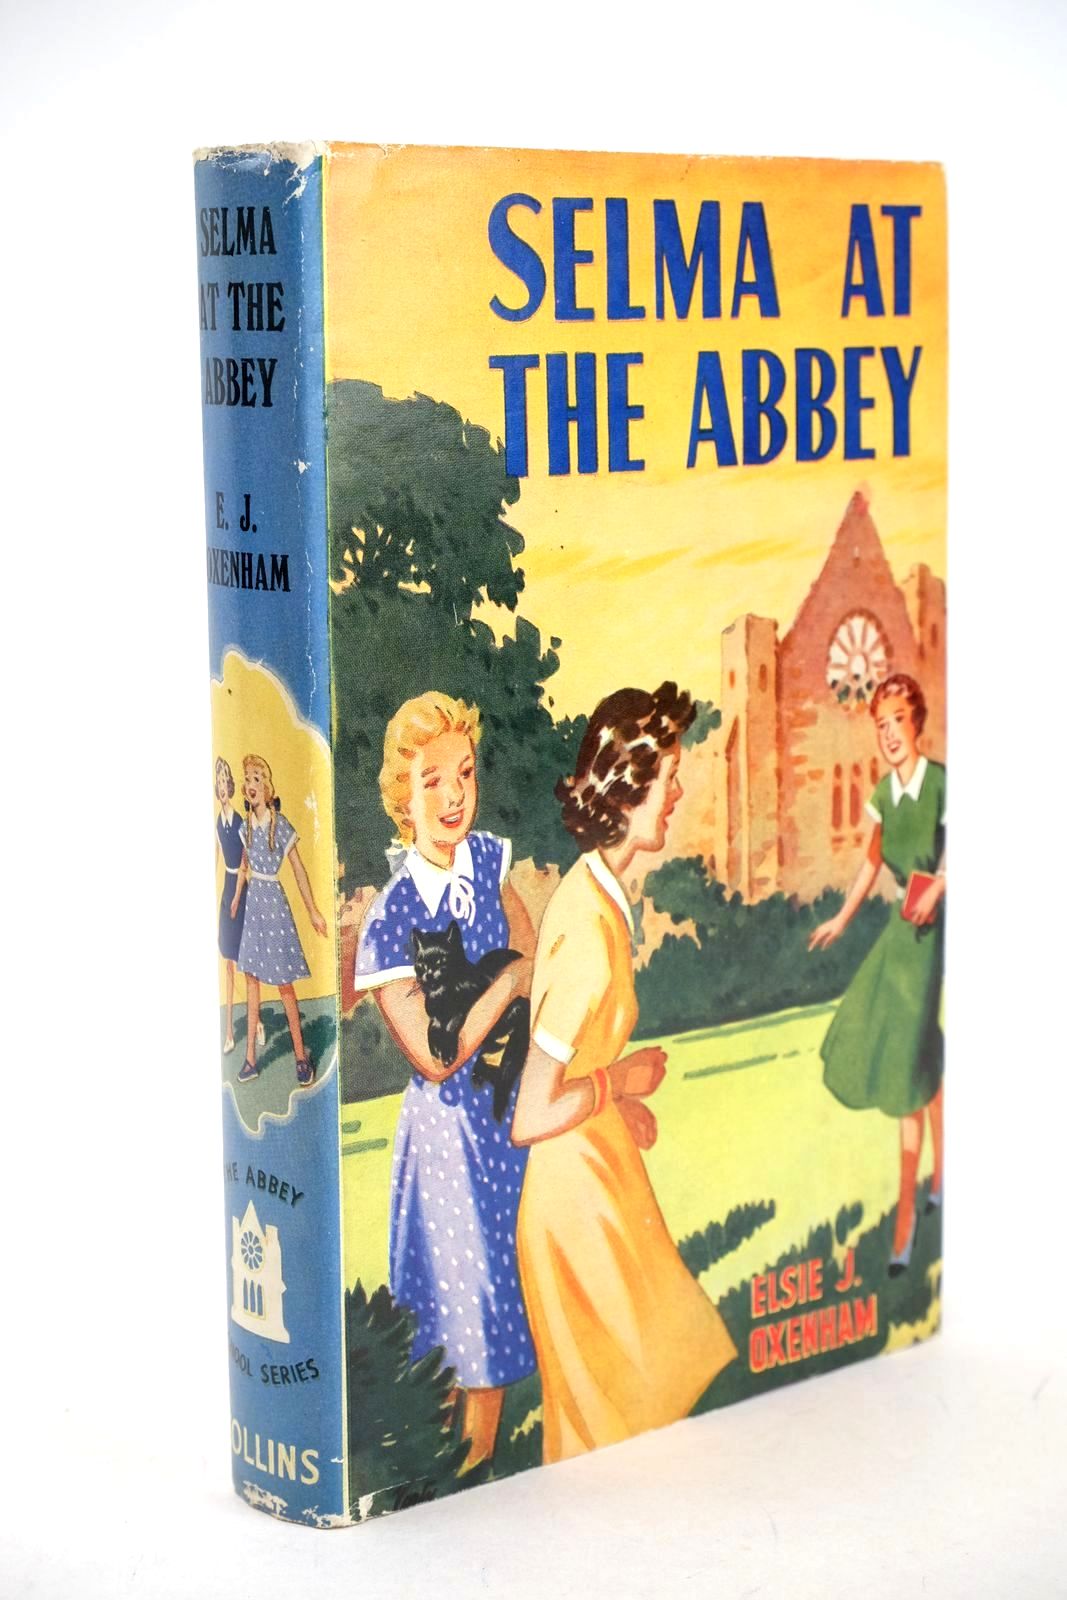 Photo of SELMA AT THE ABBEY written by Oxenham, Elsie J. published by Collins (STOCK CODE: 1326846)  for sale by Stella & Rose's Books